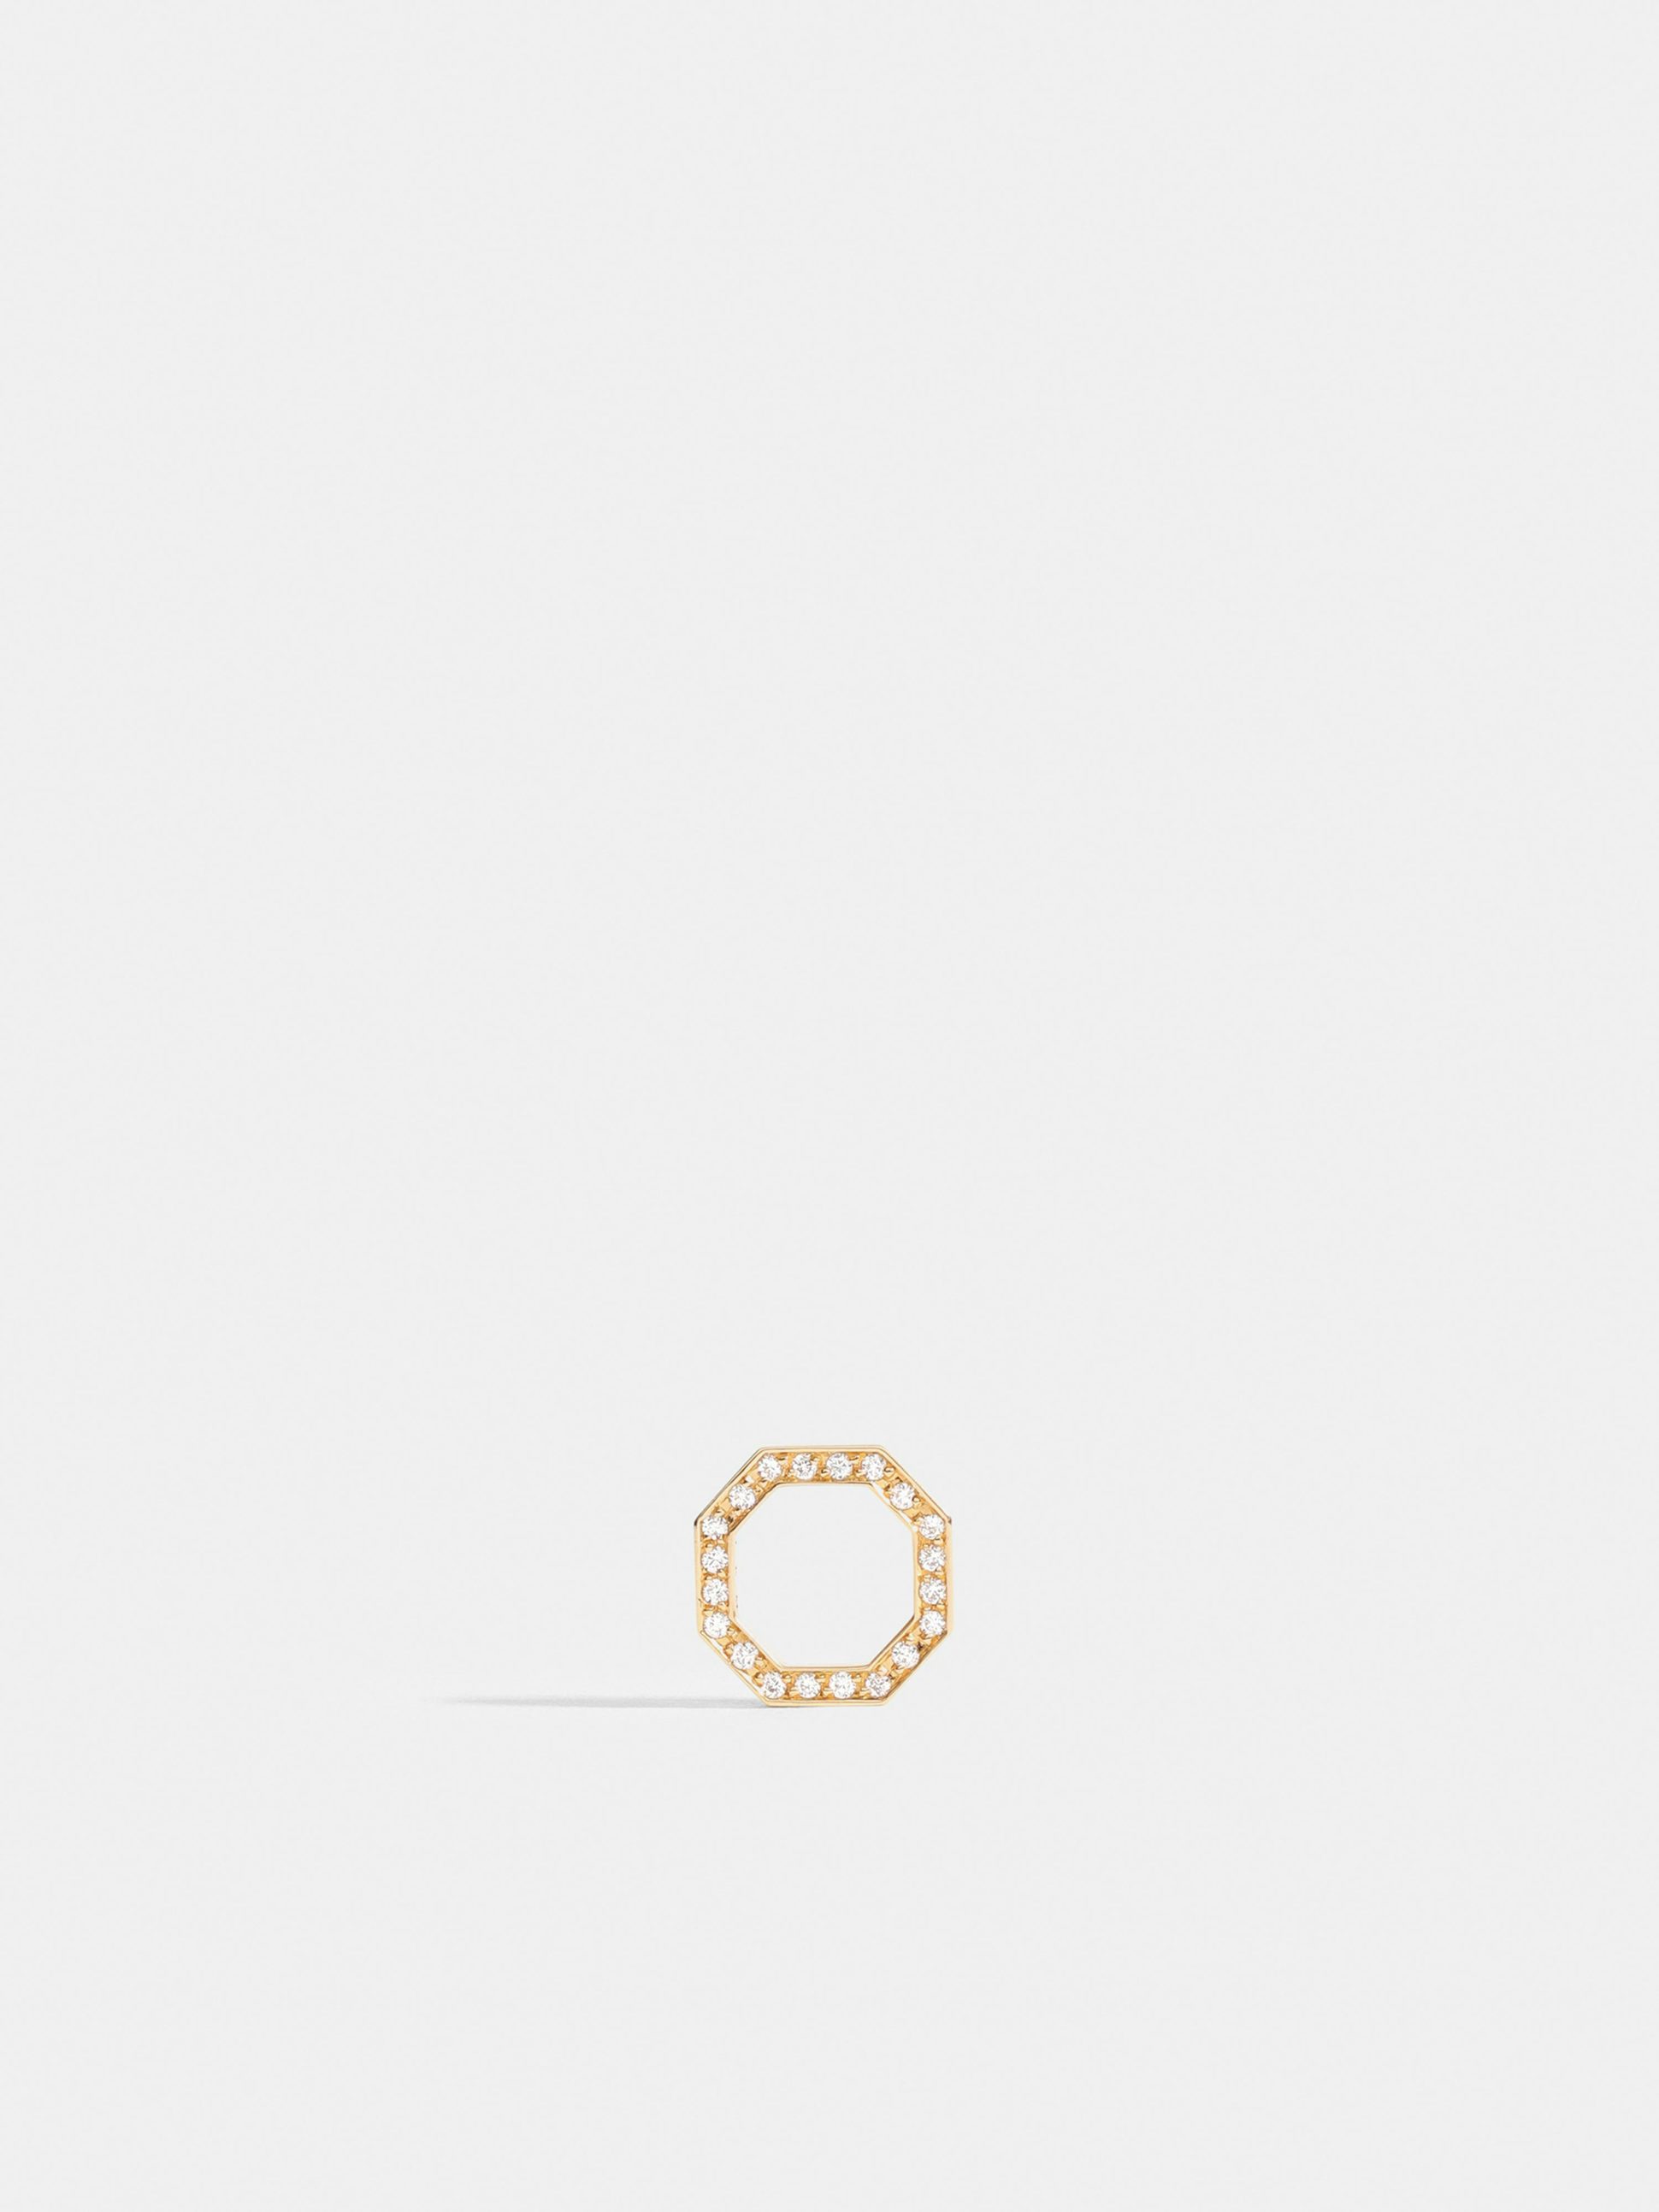 Octogone motif in 18k Fairmined ethical yellow gold, paved with lab-grown diamonds, on an antique pink cord.